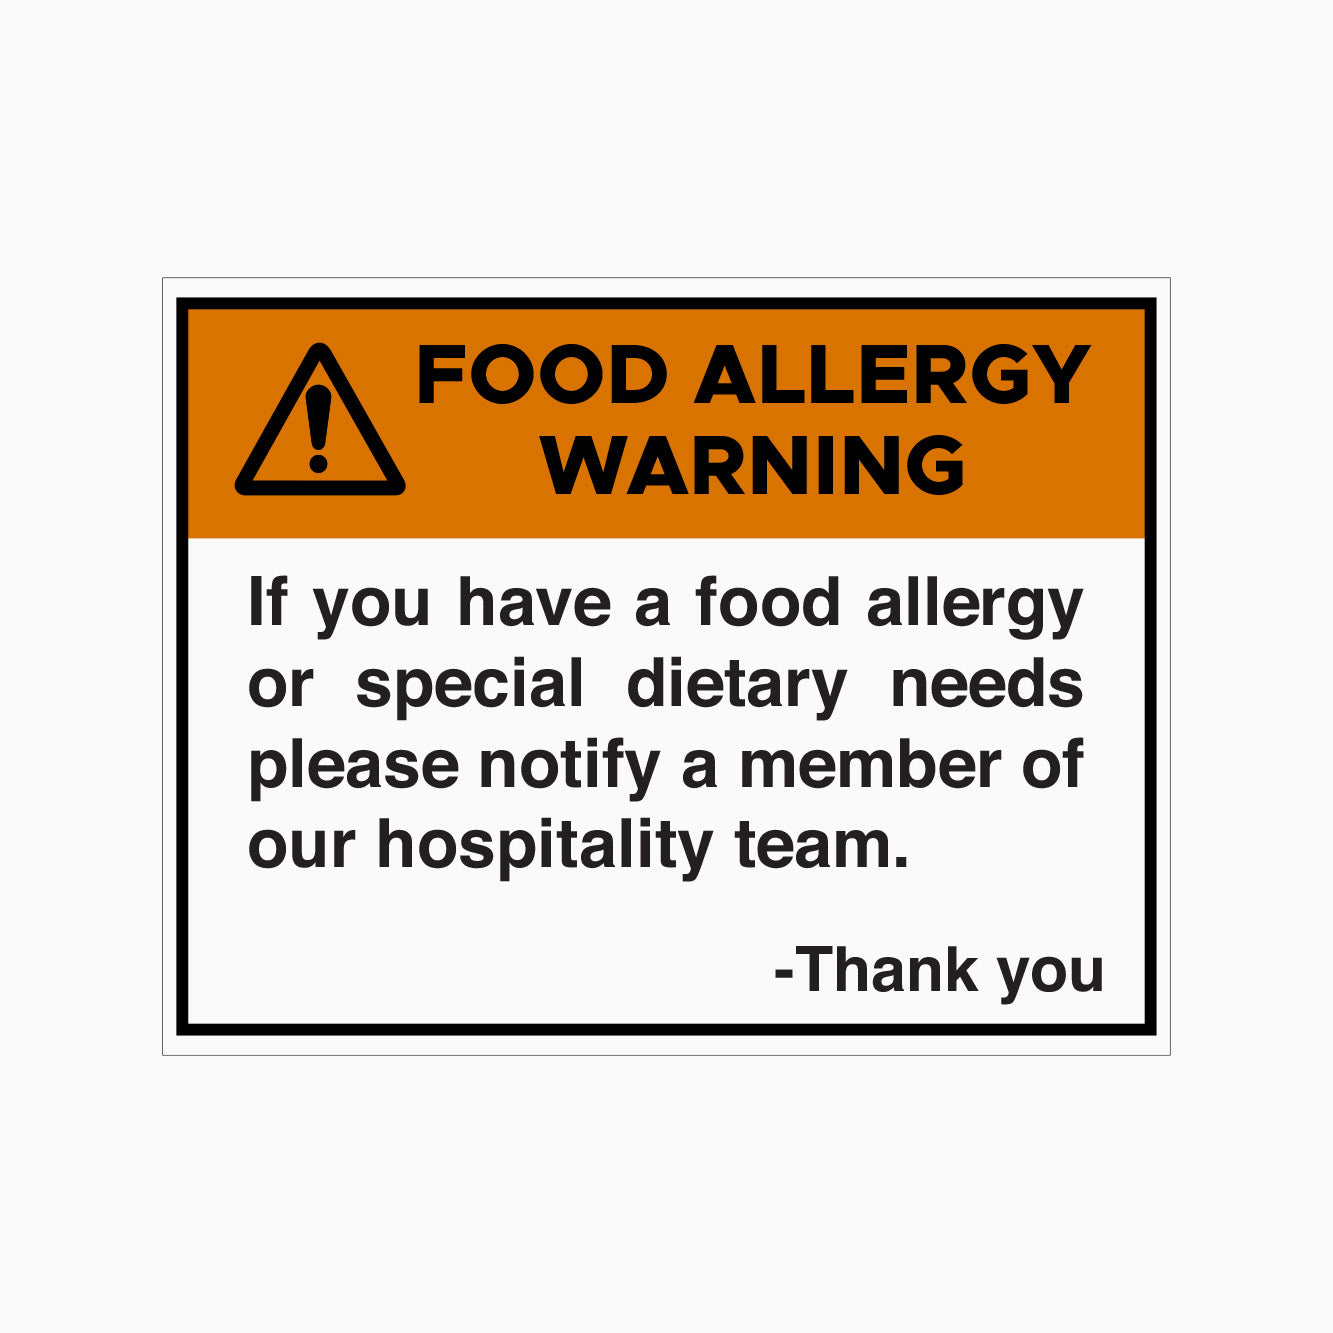 FOOD ALLERGY WARNING SIGN - IF YOU HAVE A ALLERGY OR SPECIAL DIETARY NEEDS PLEASE NOTIFY A MEMBER OF OUR HOSPITALITY TEAM SIGN